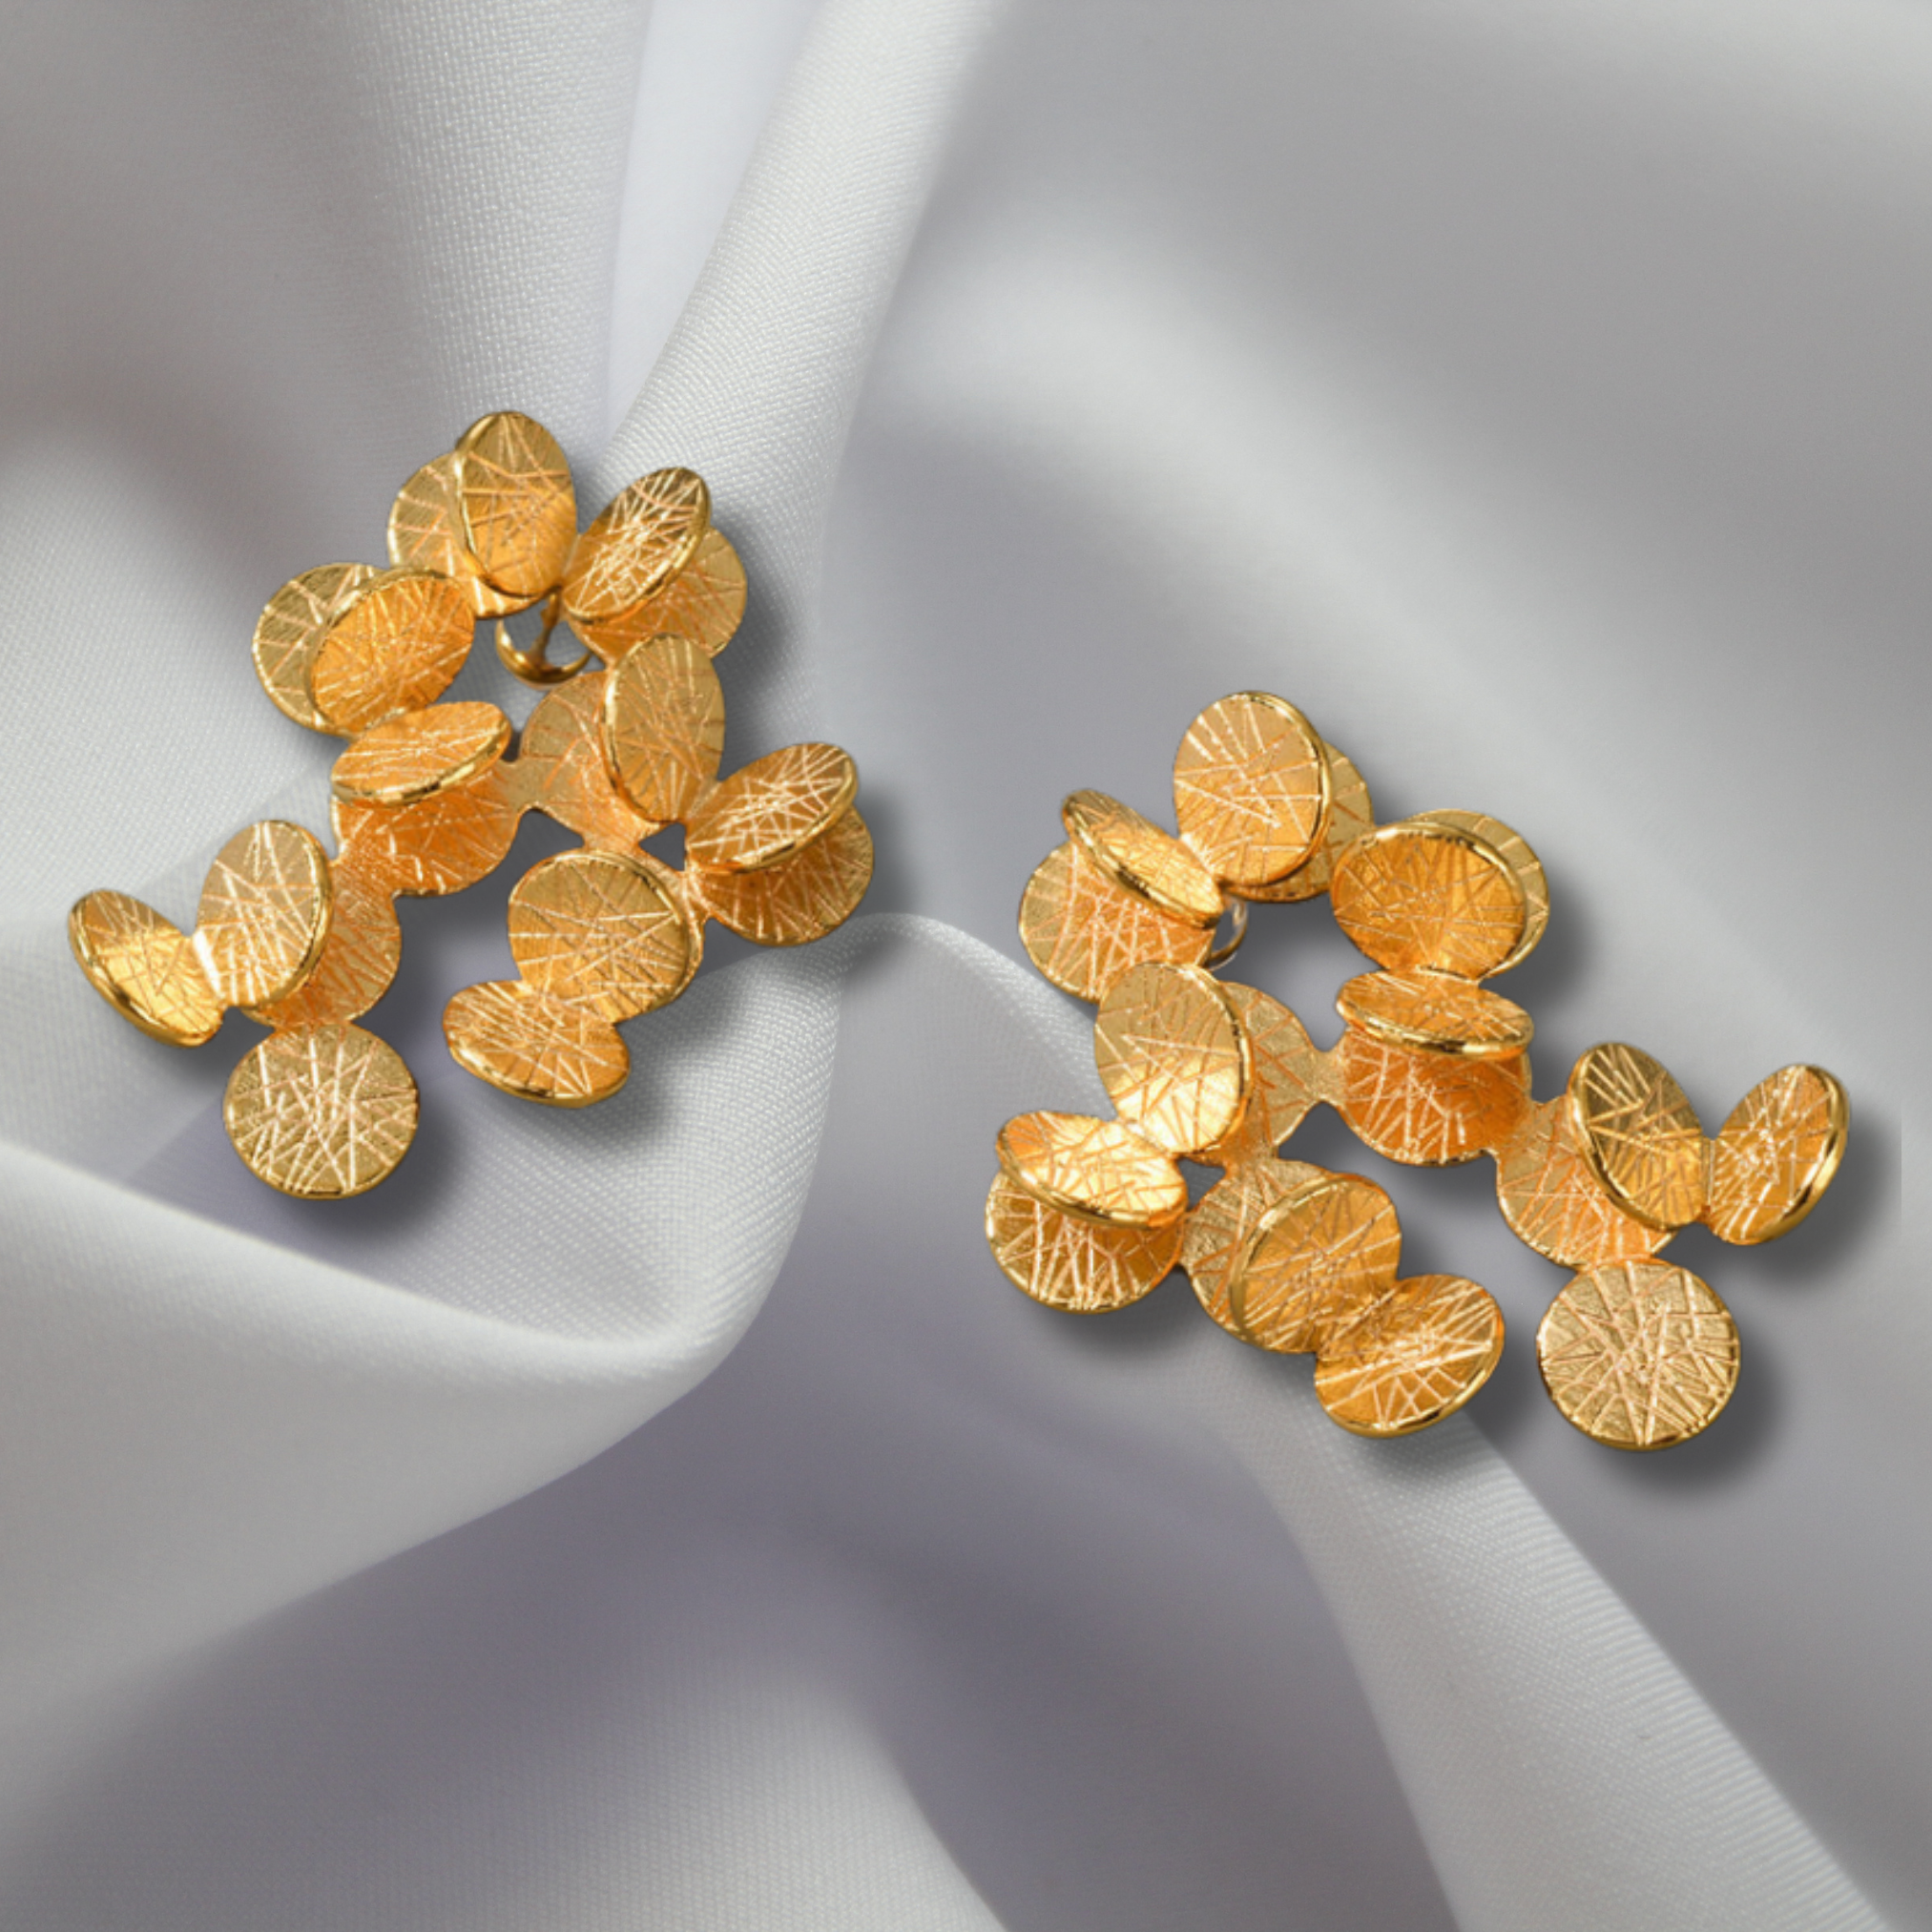 a pair of gold earrings on a white fabric